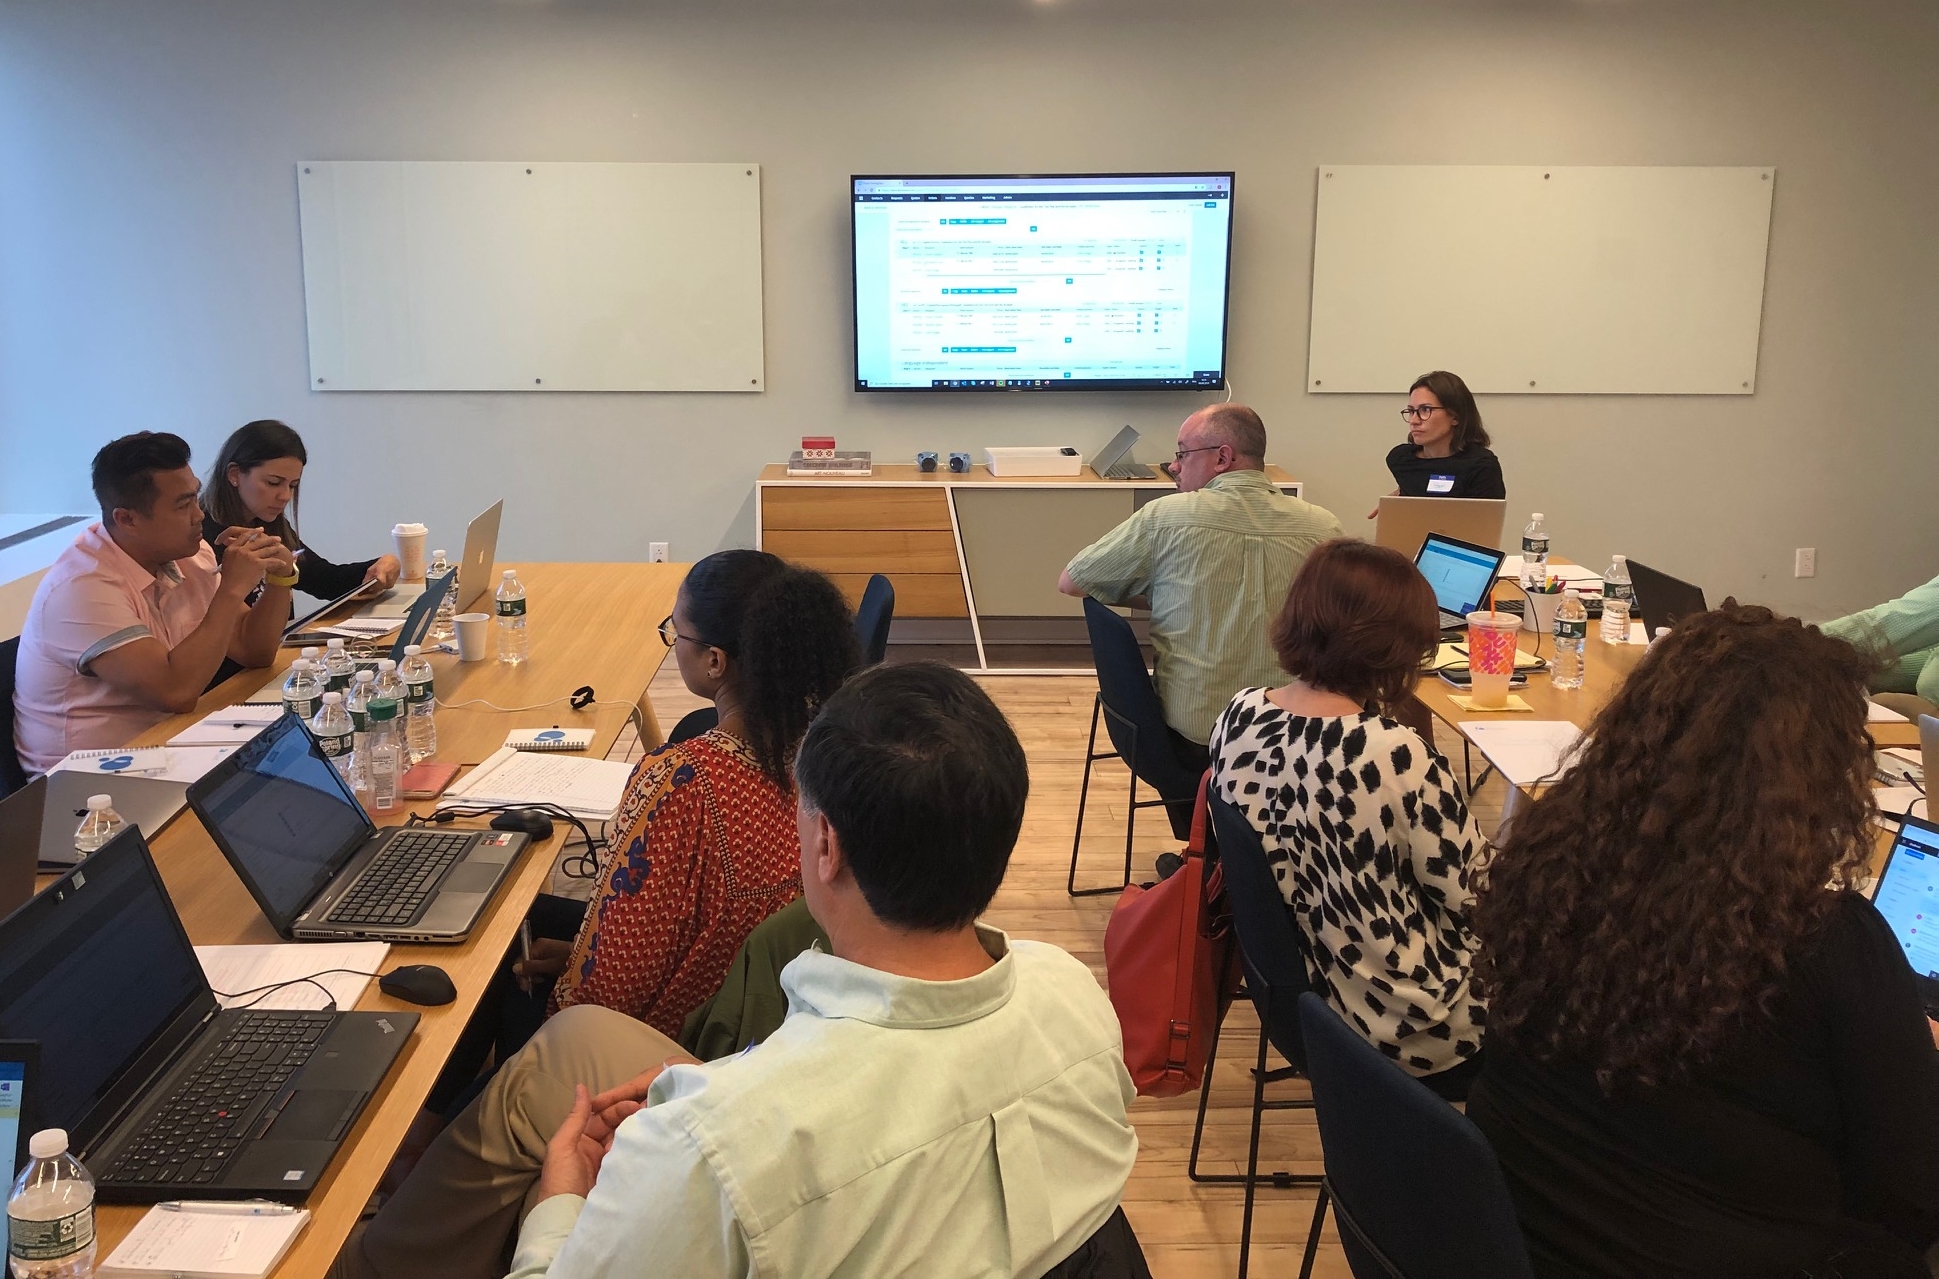 Plunet Training Days 2019: Session with participants